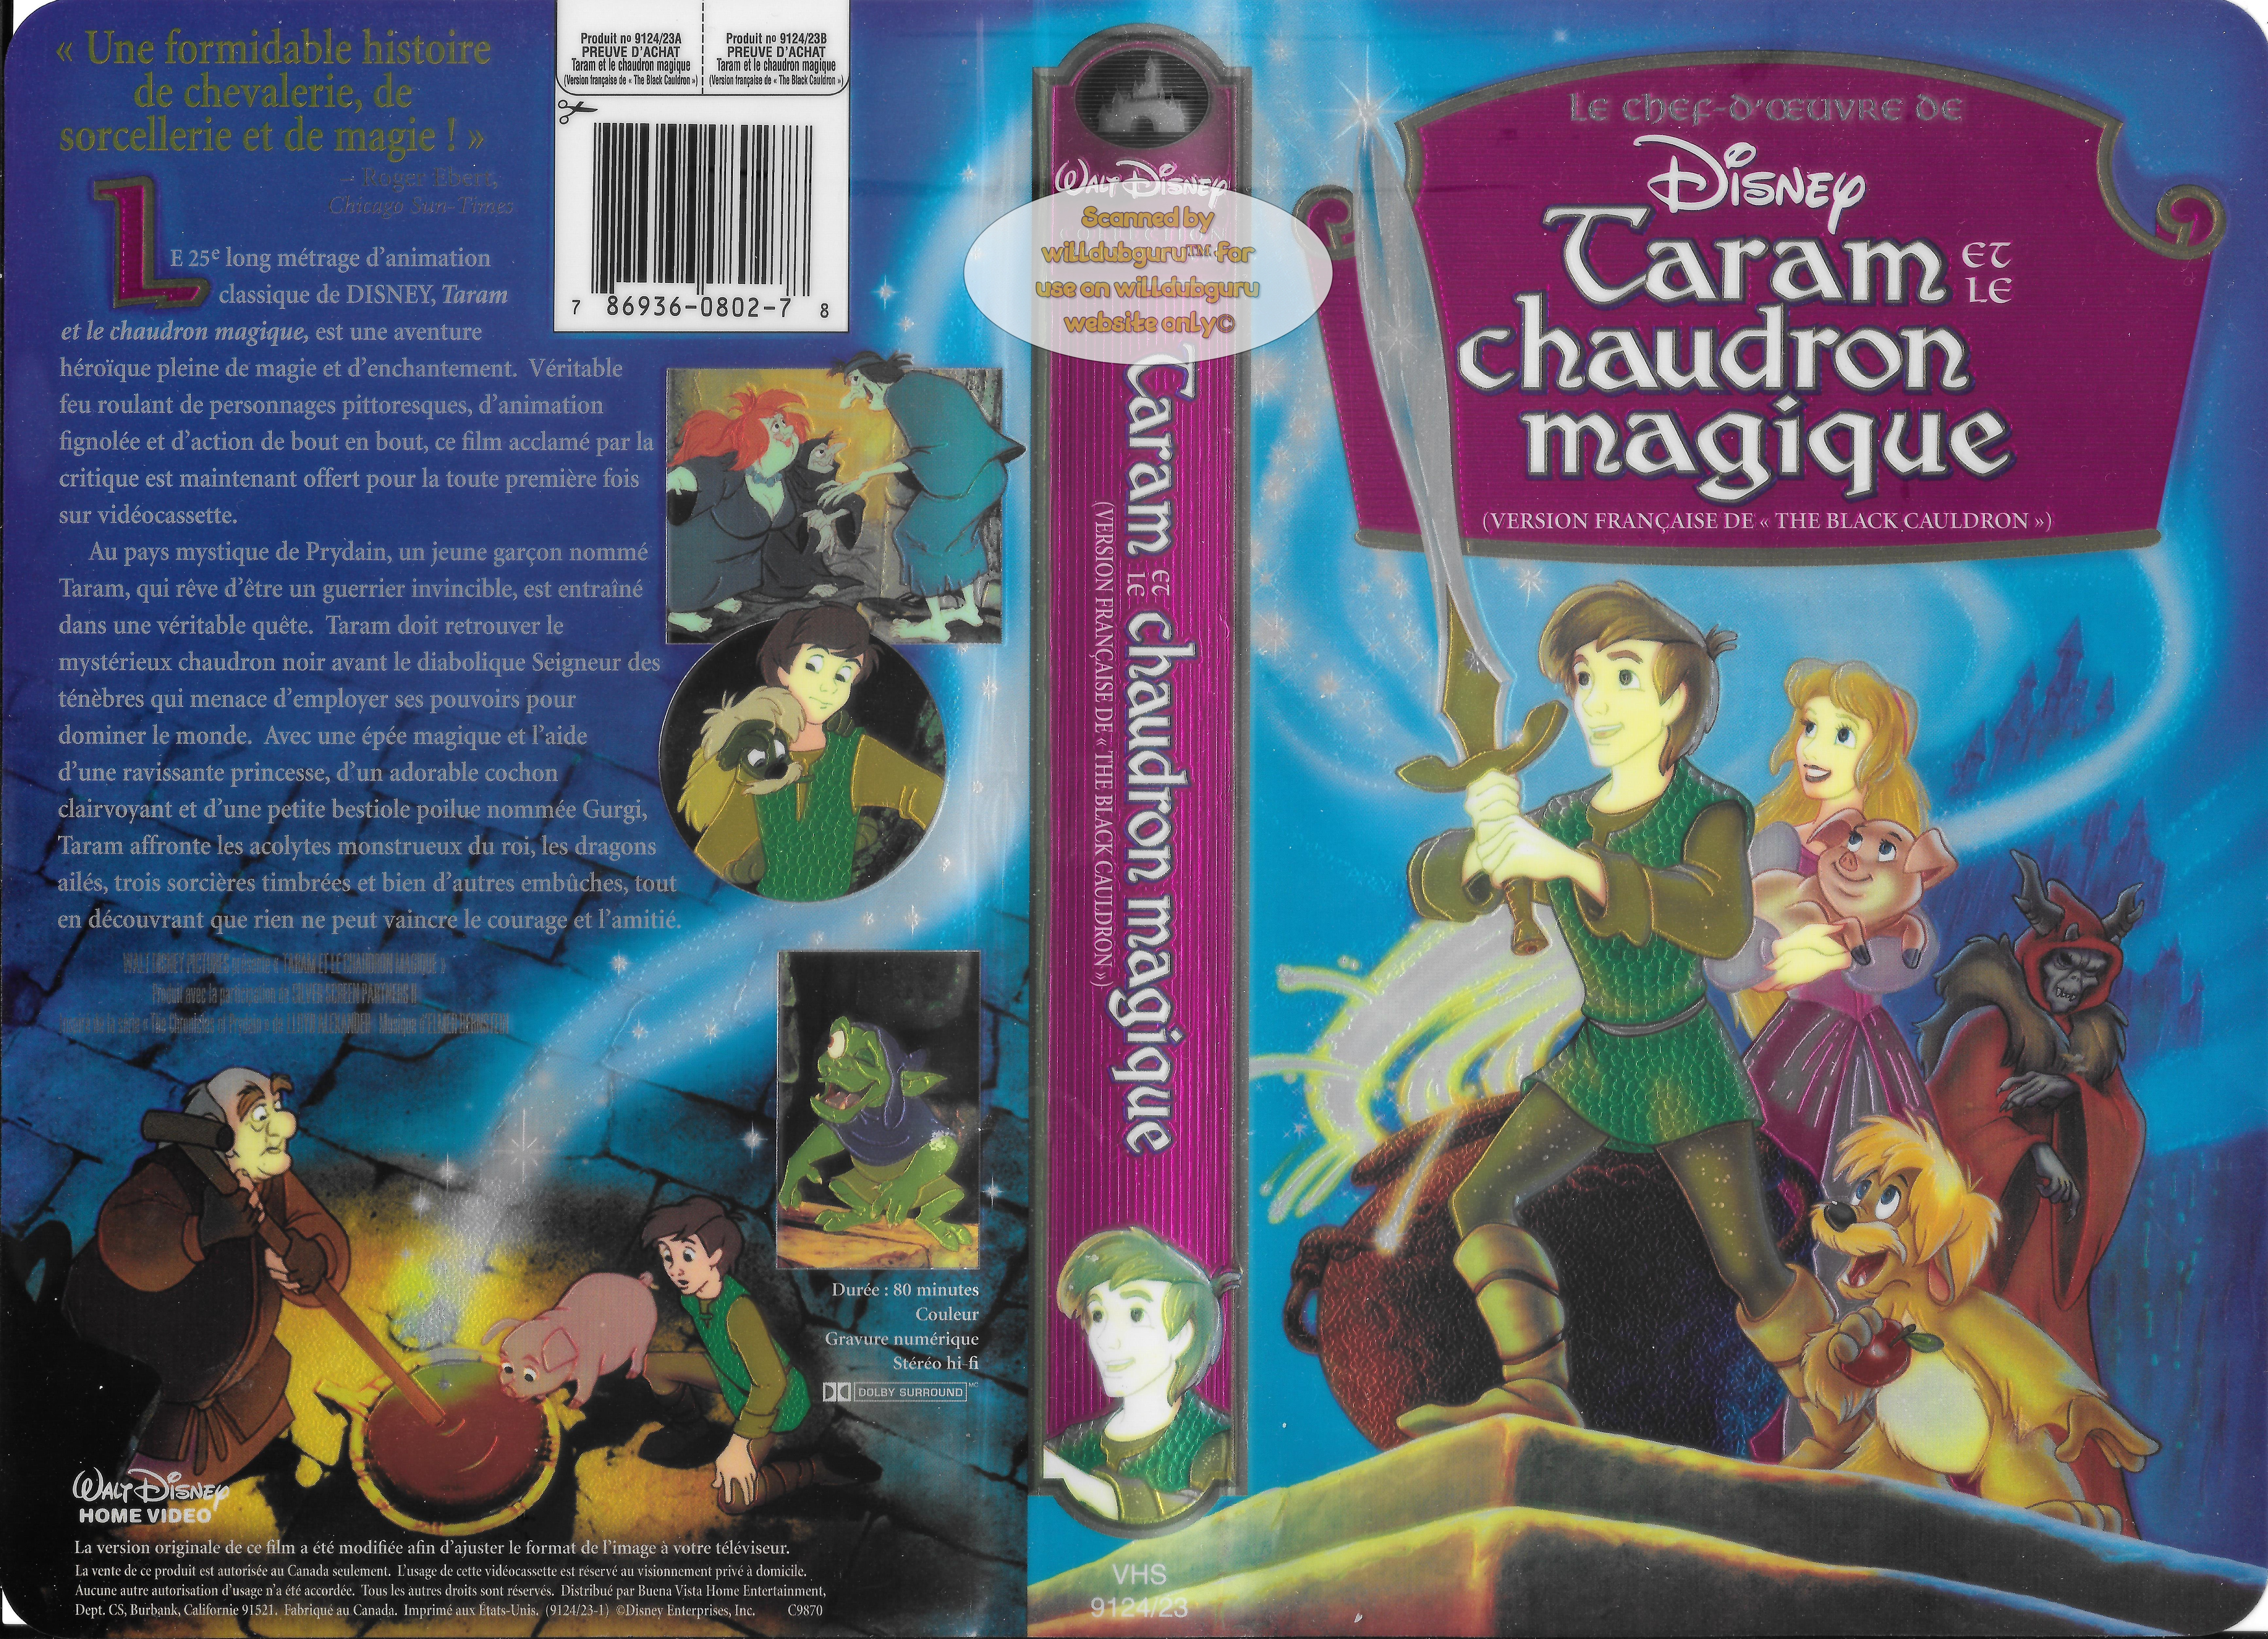 How to watch and stream Taram et le chaudron magique - French Voice Cast,  1985 on Roku